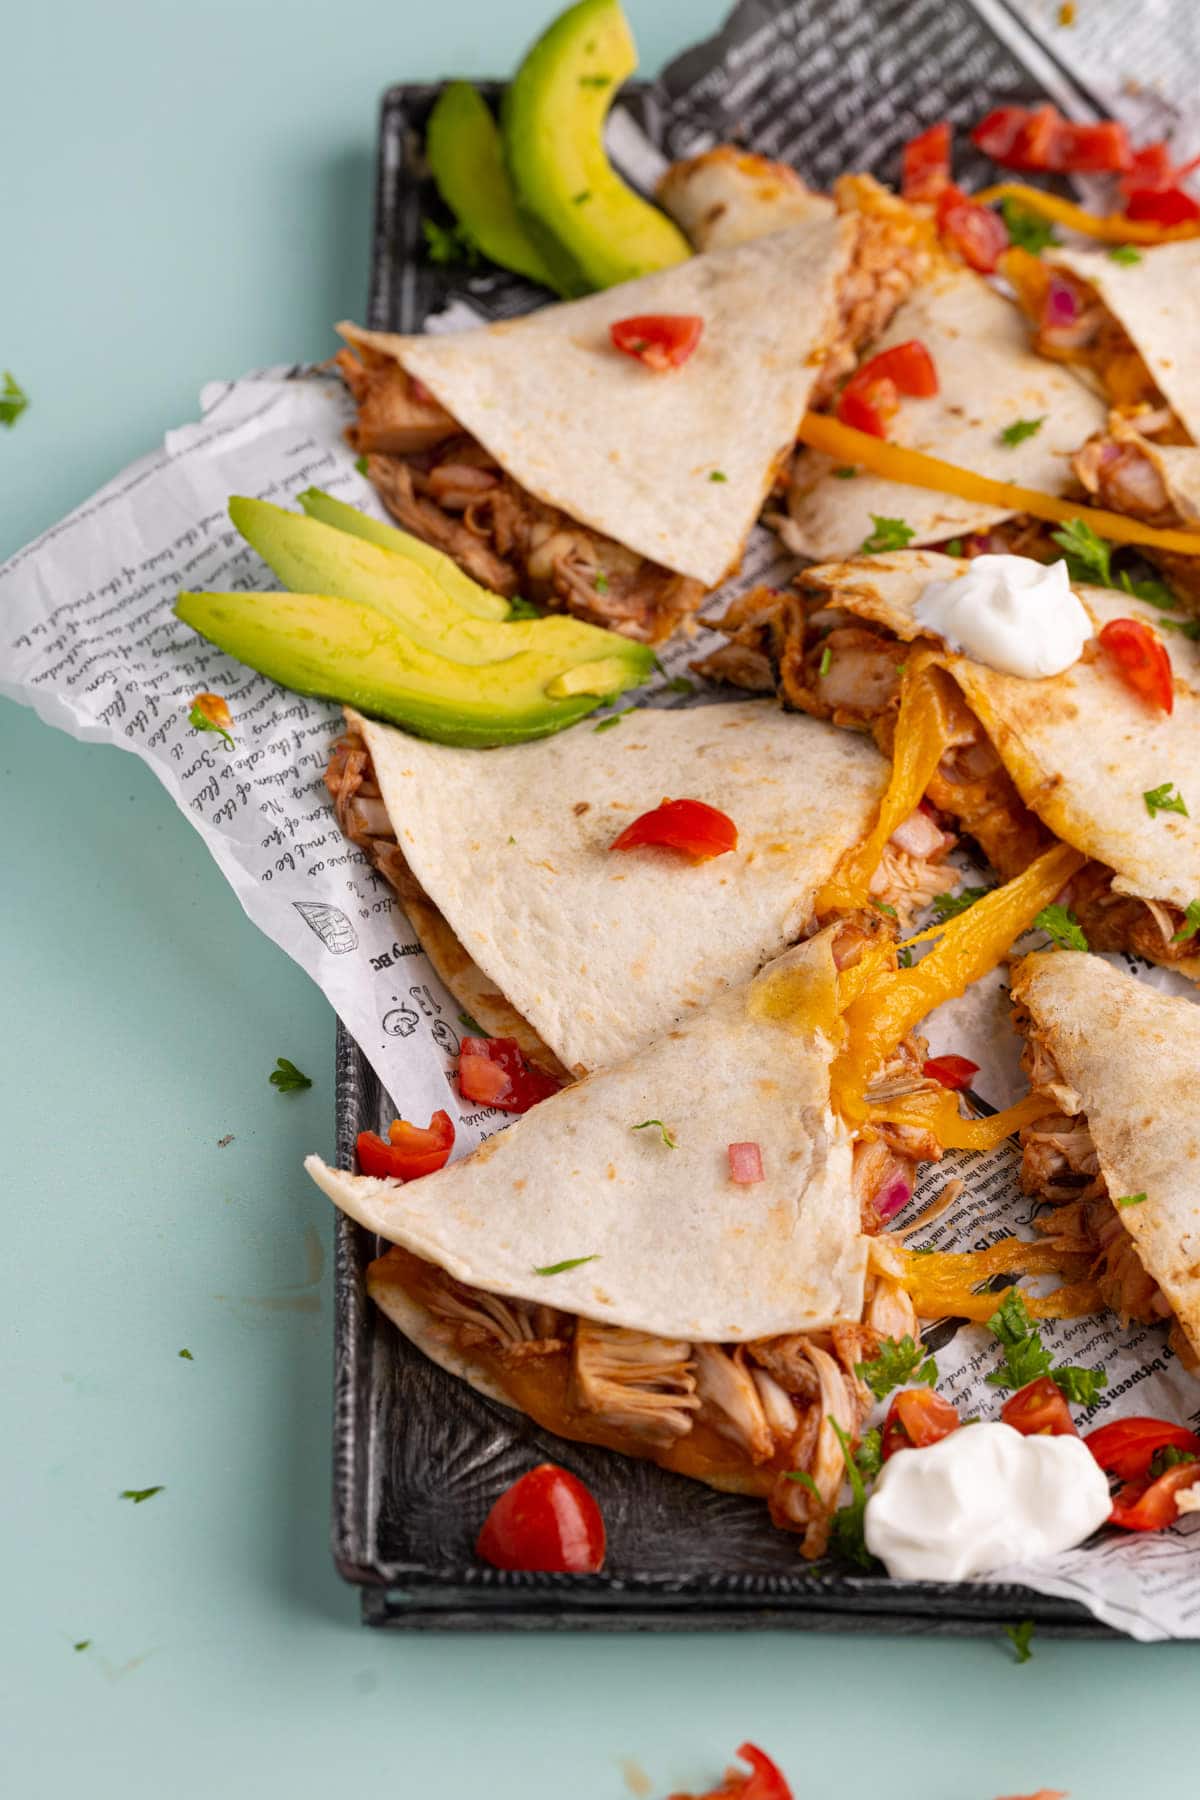 BBQ Jackfruit Quesadilla served with sour cream, avocado, and diced tomatoes